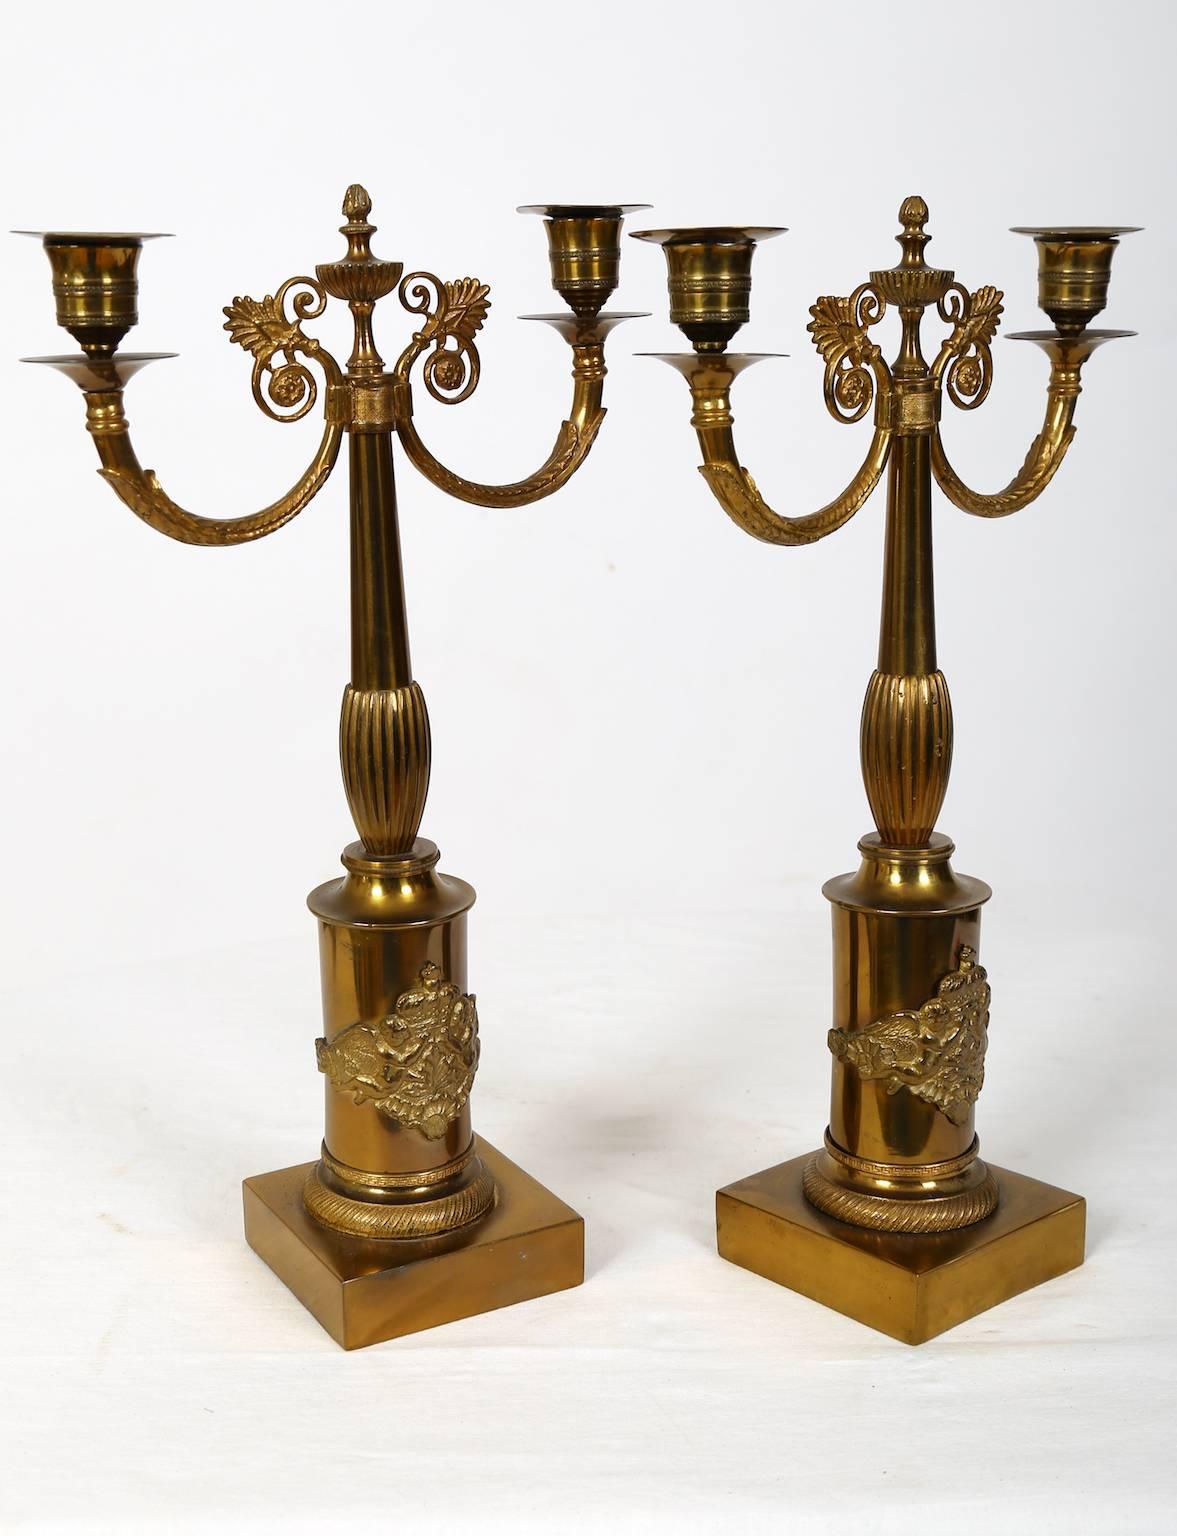 Pair of Brass Gilded Candelabras, Late Empire, Sweden, circa 1835 In Excellent Condition For Sale In Malmo, SE